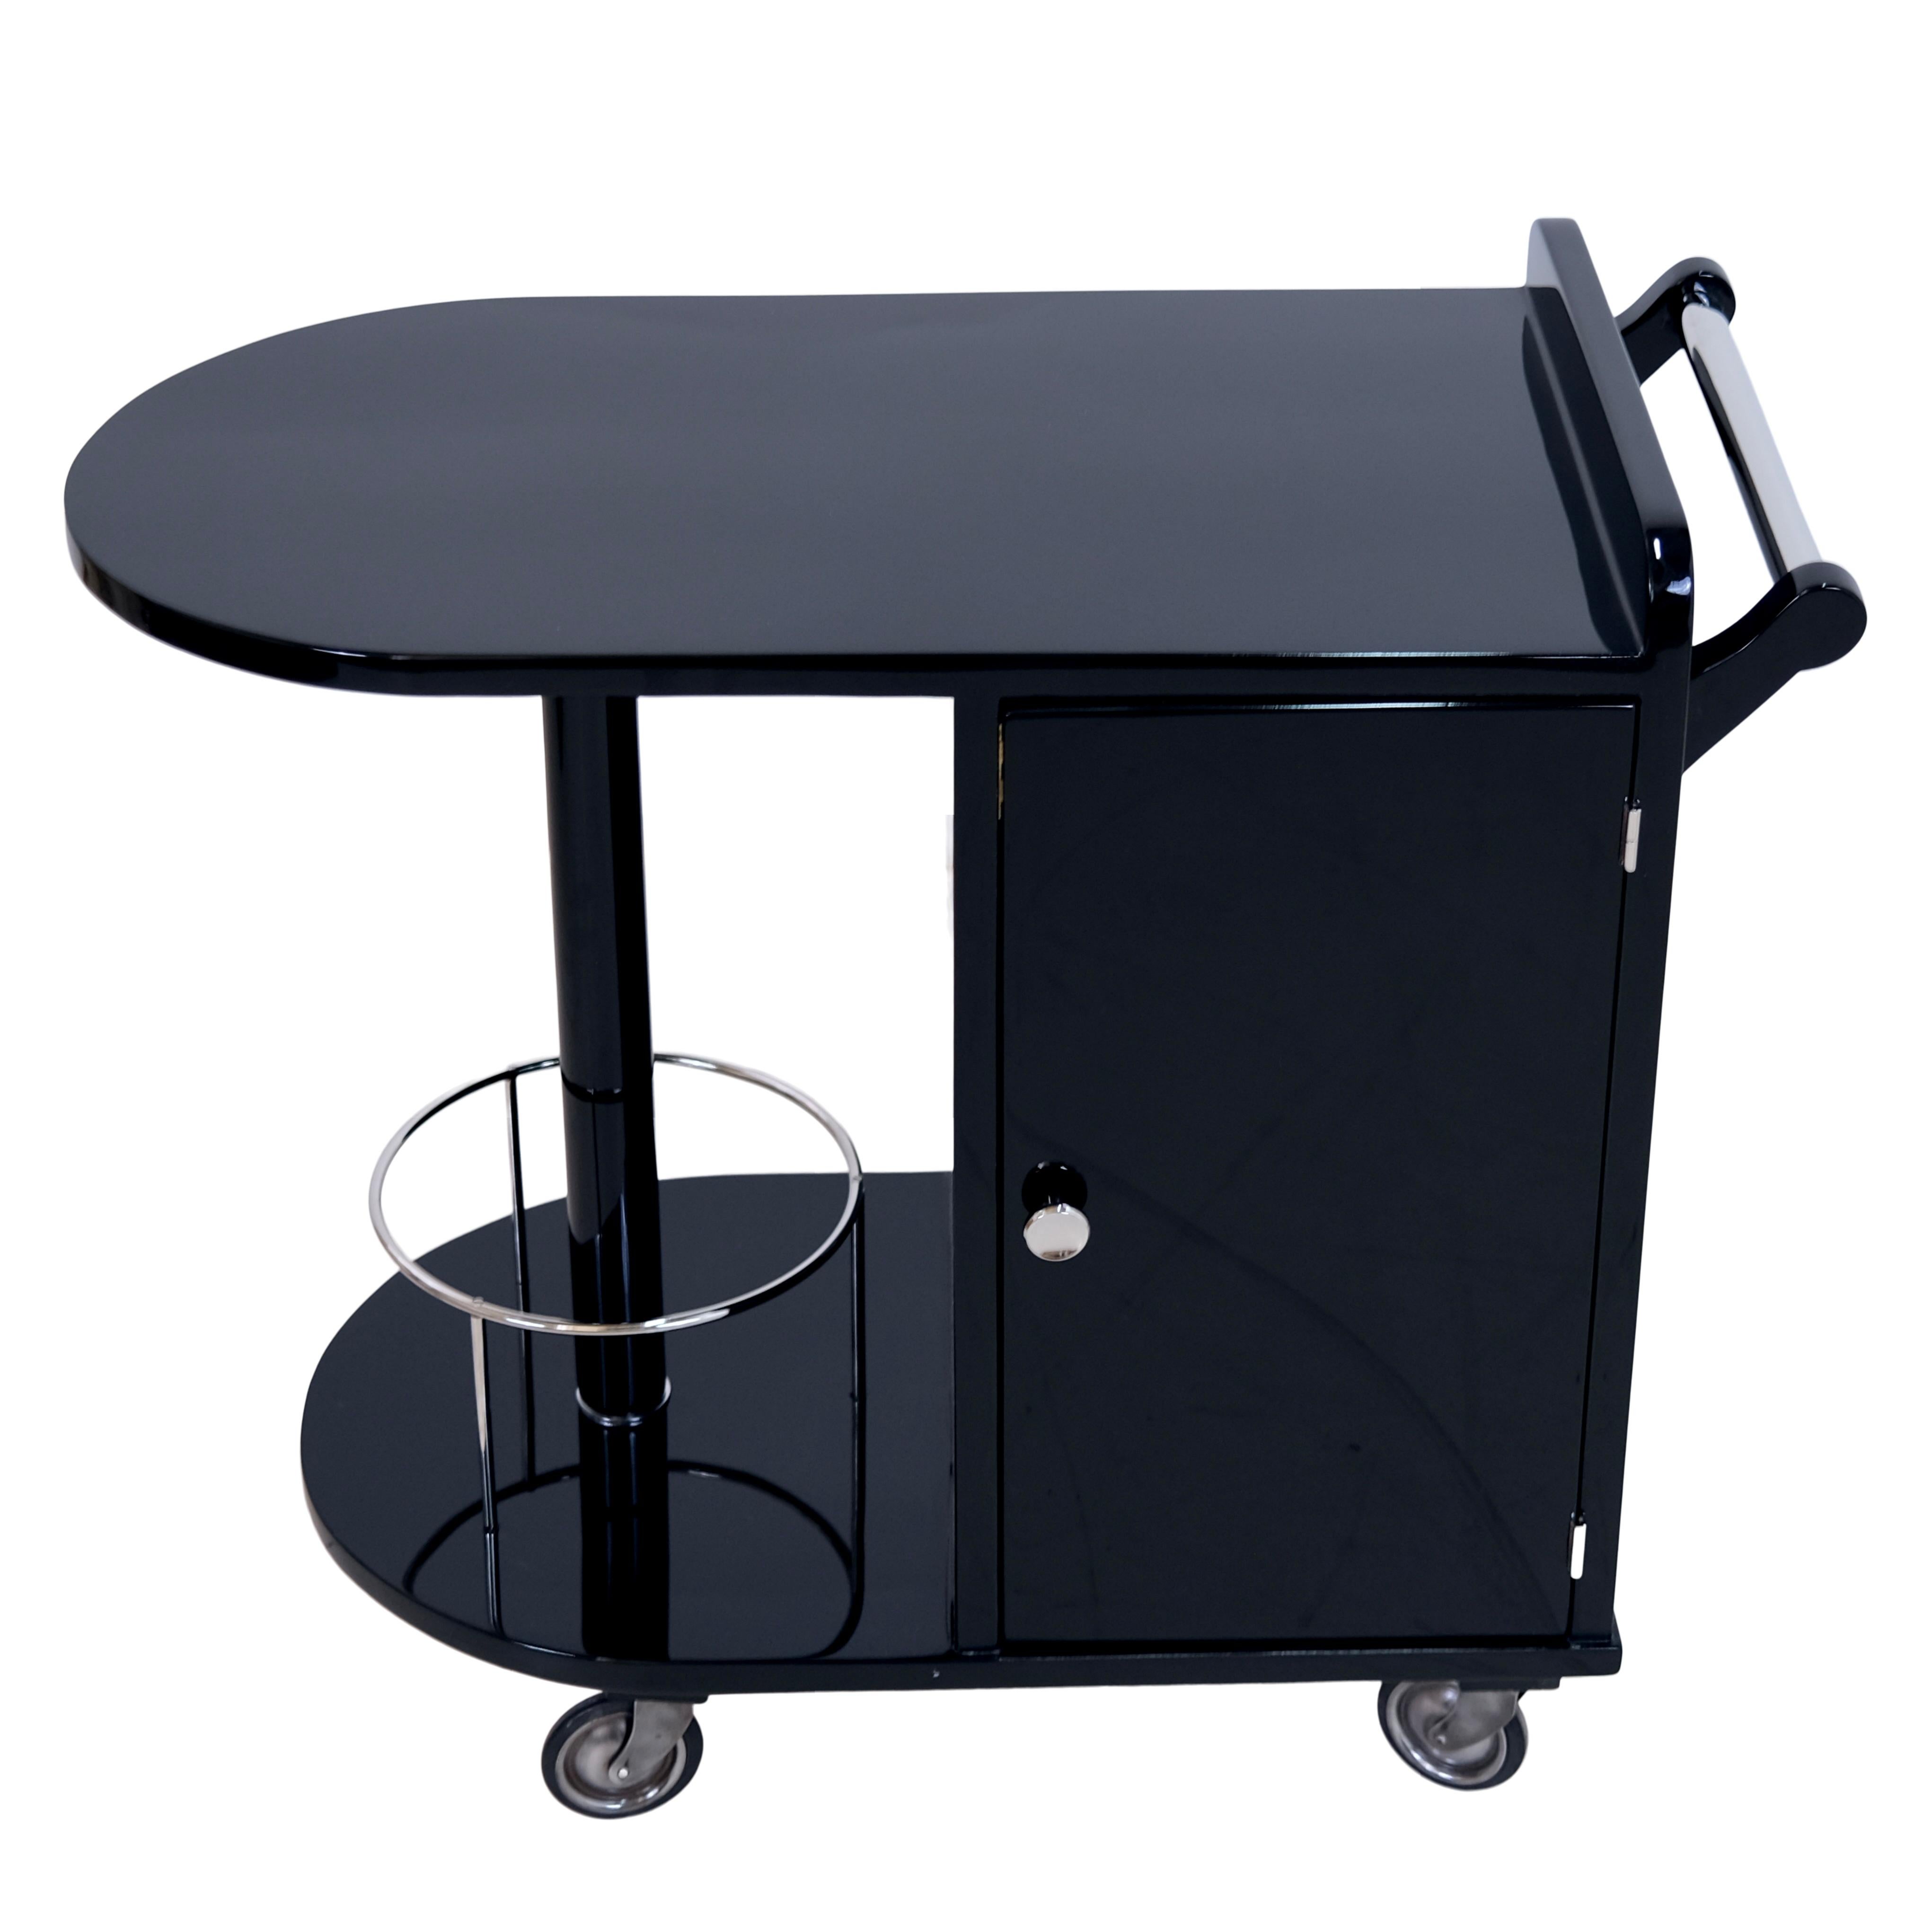 Bar trolley with two doors
Round bottle cage on column
High gloss black piano lacquer

Original Art Deco, France 1930s

Dimensions:
Width: 80 cm
Height: 72.5 cm
Depth: 40 cm.